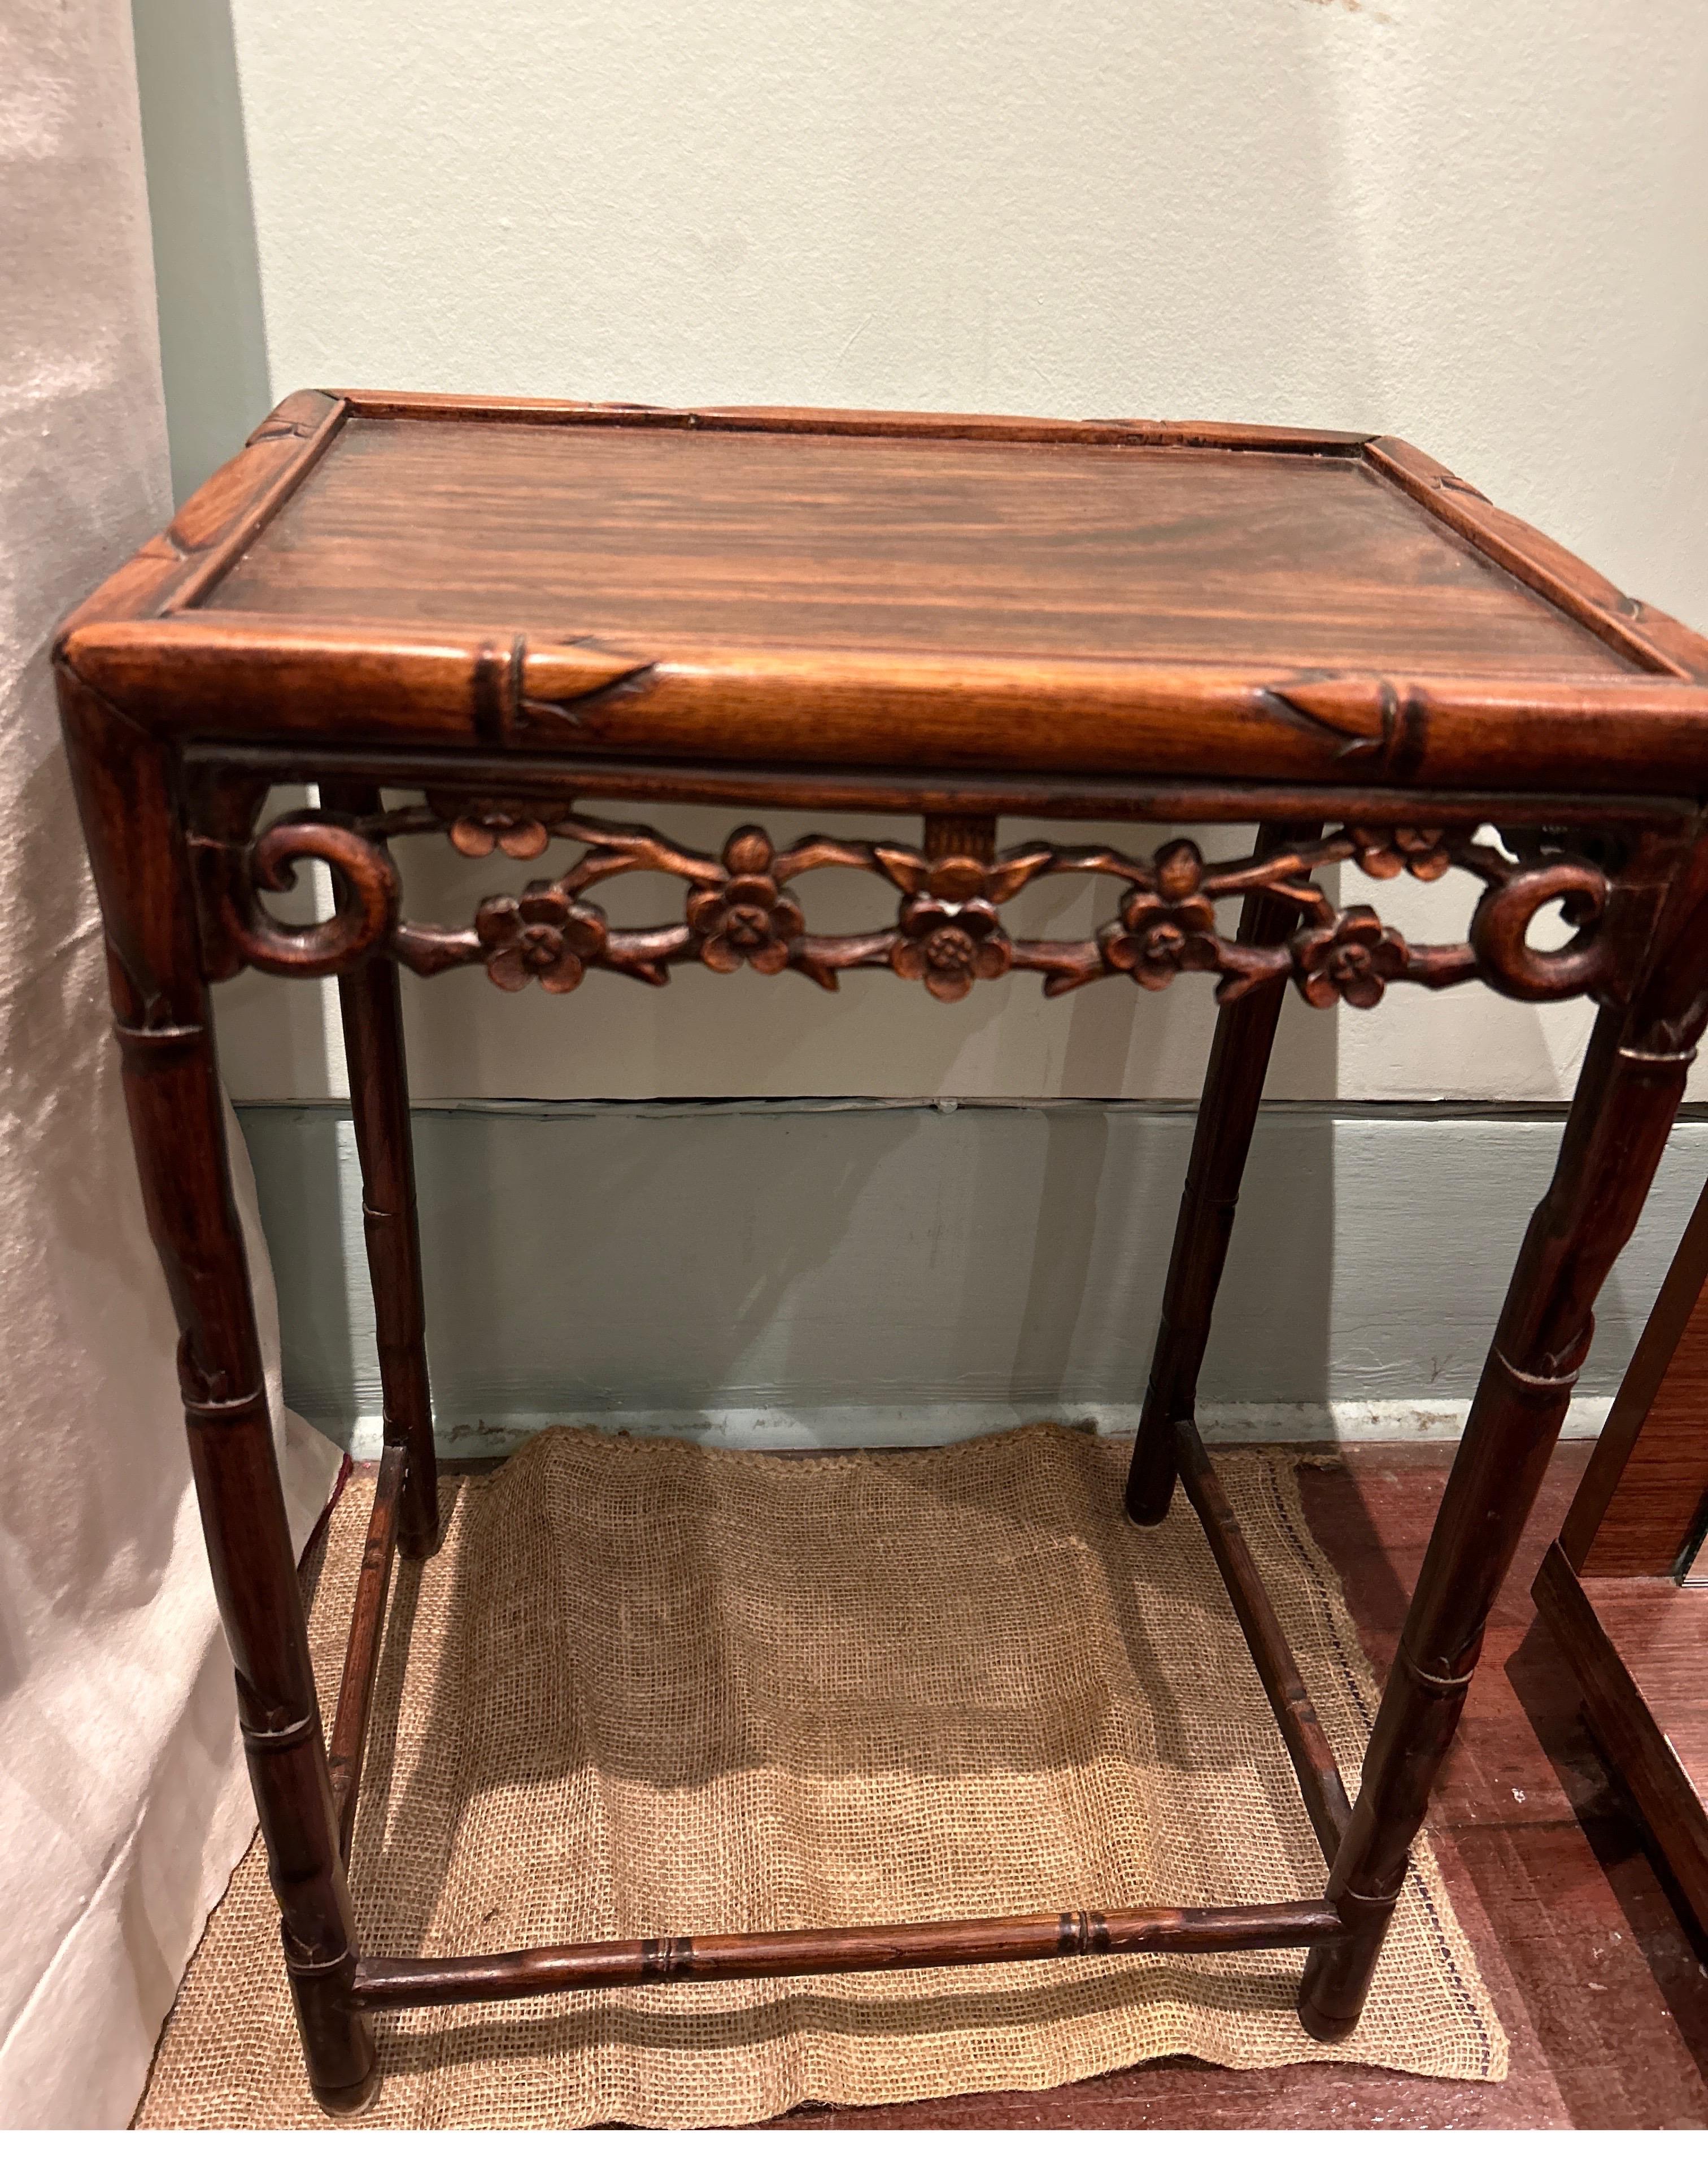 Elegant hand carved late Qing Dynasty Chinese Rosewood table with delicate carving and slender bamboo theme legs. Some chips in relief carving as seen otherwise in good original condition. Nice conversation piece to incorporate into an Asian or